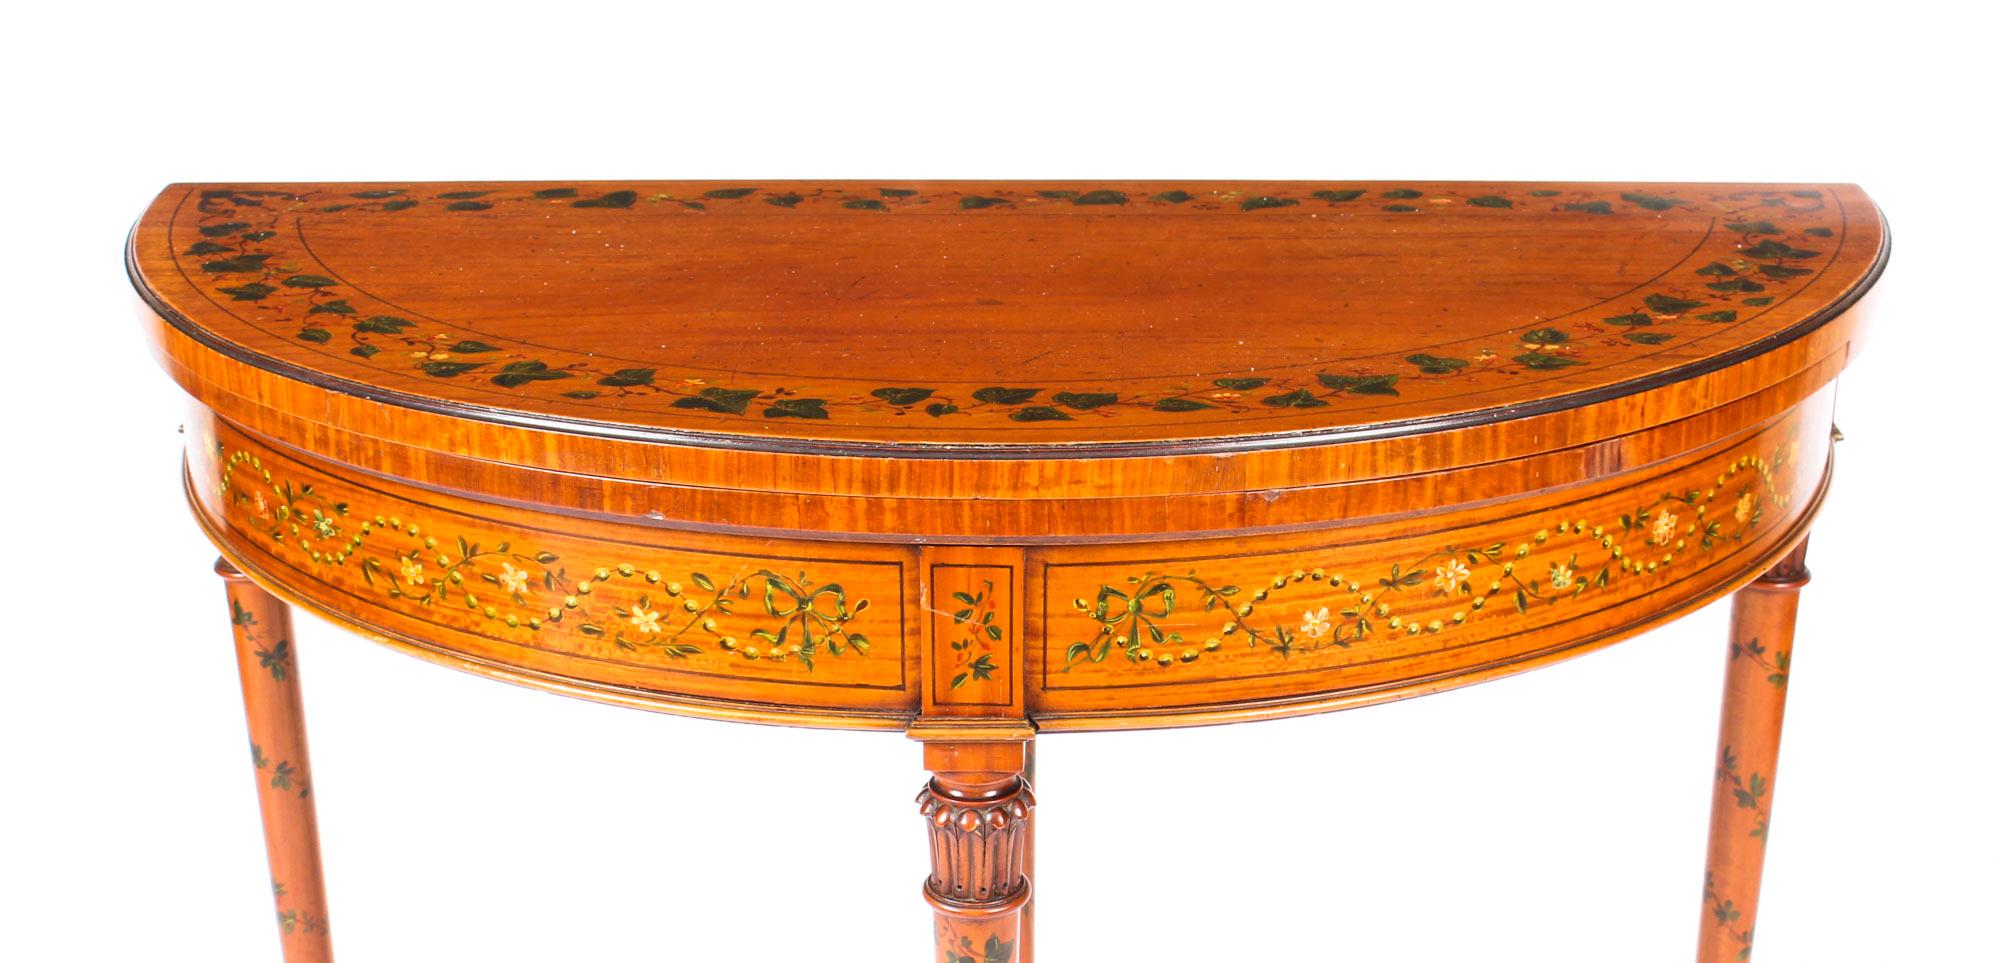 Sheraton Antique Hand Painted Satinwood Demi-Lune Card Console Table, 19th Century